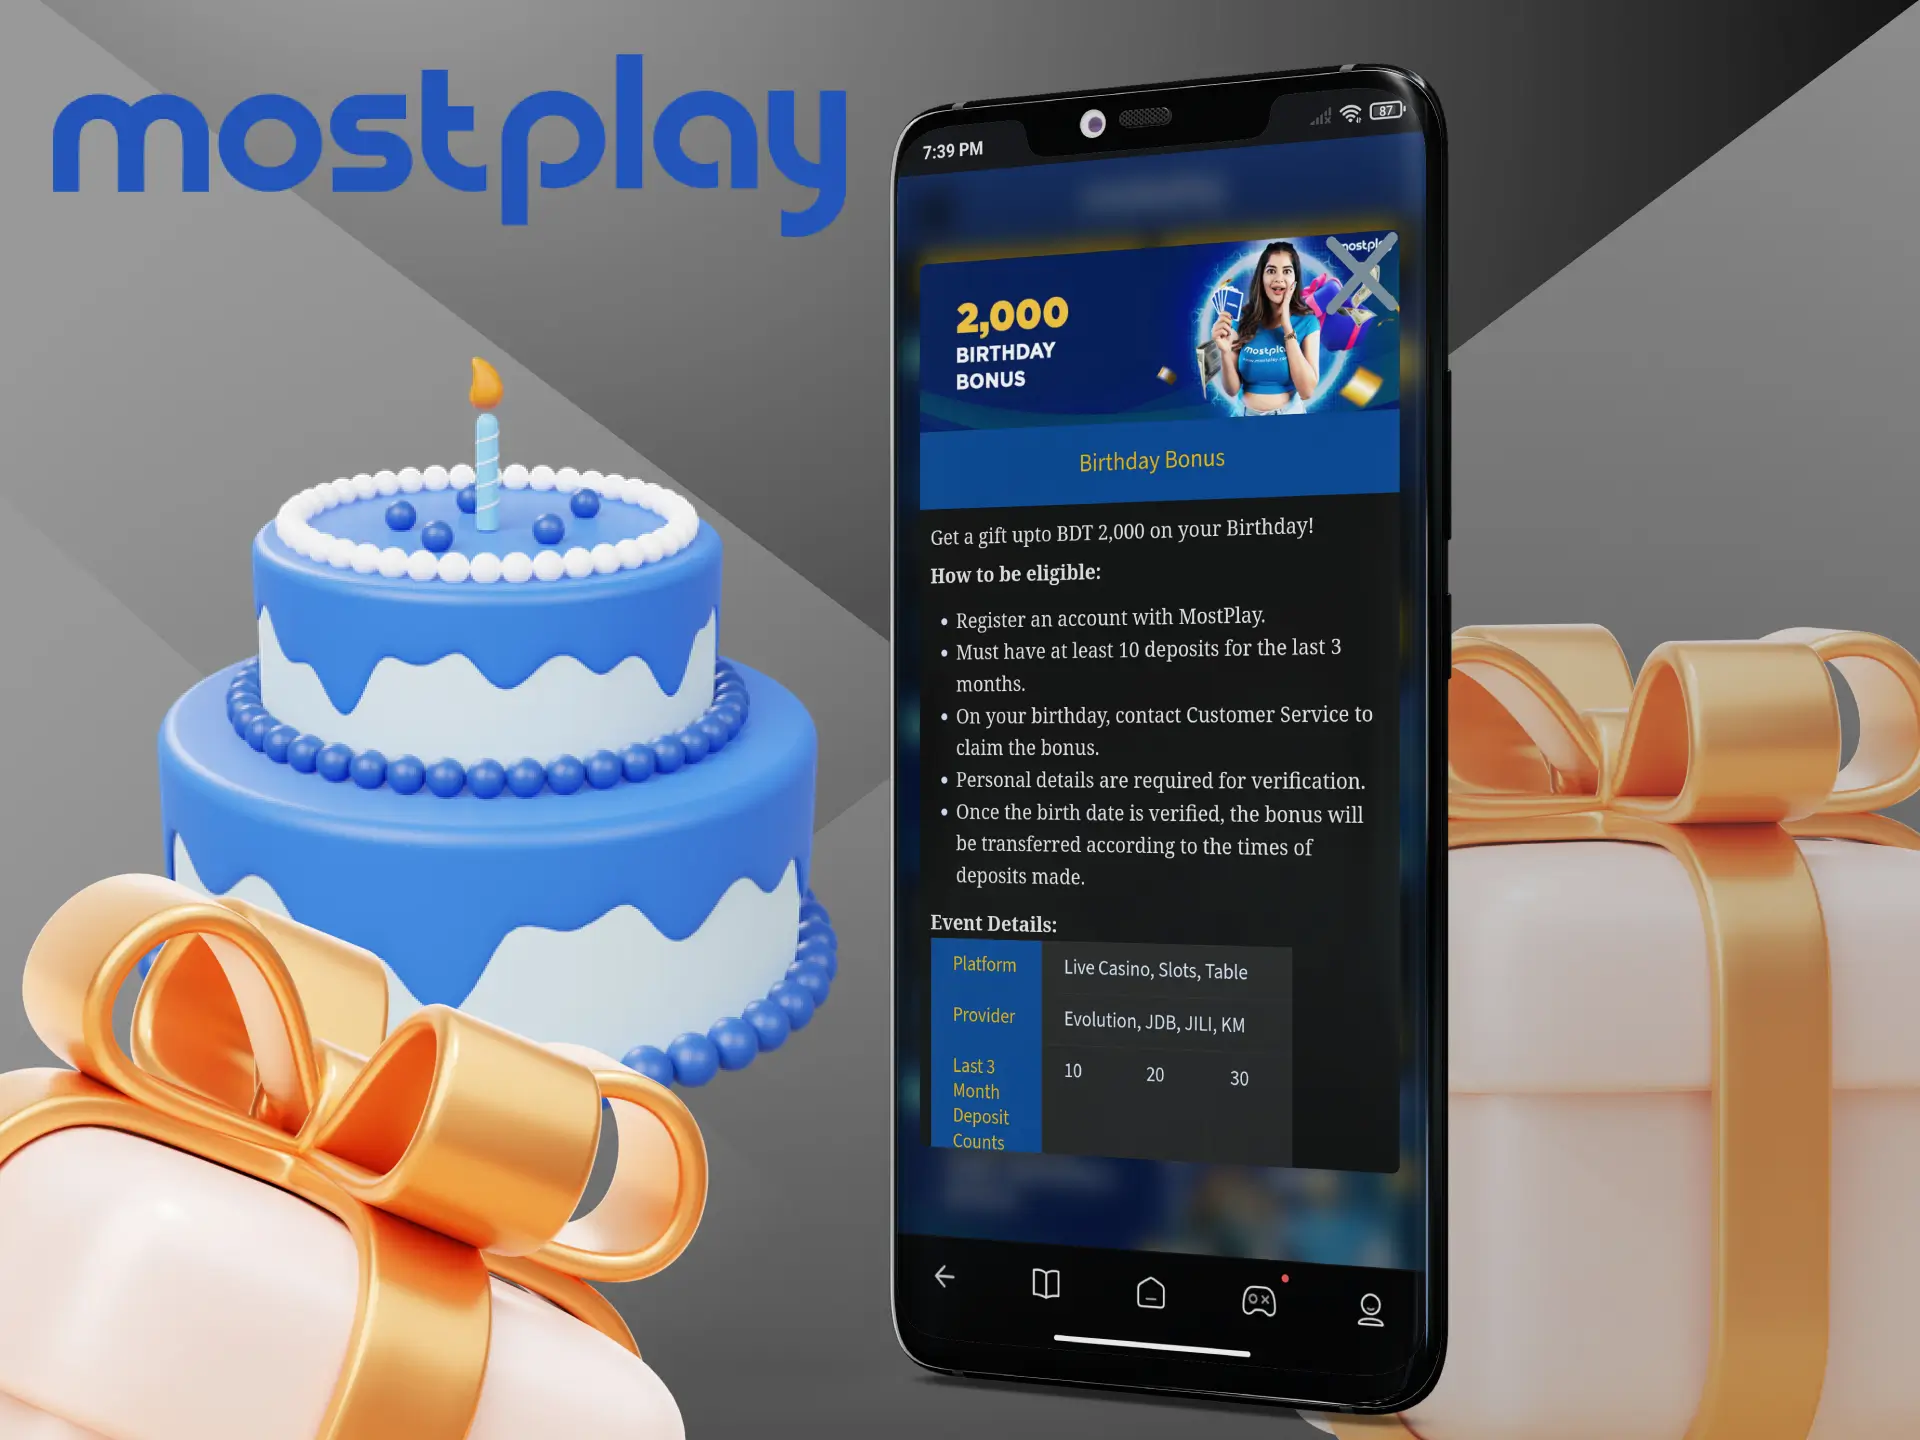 Don't miss the opportunity to get a big bonus from Mostplay in honour of your birthday.